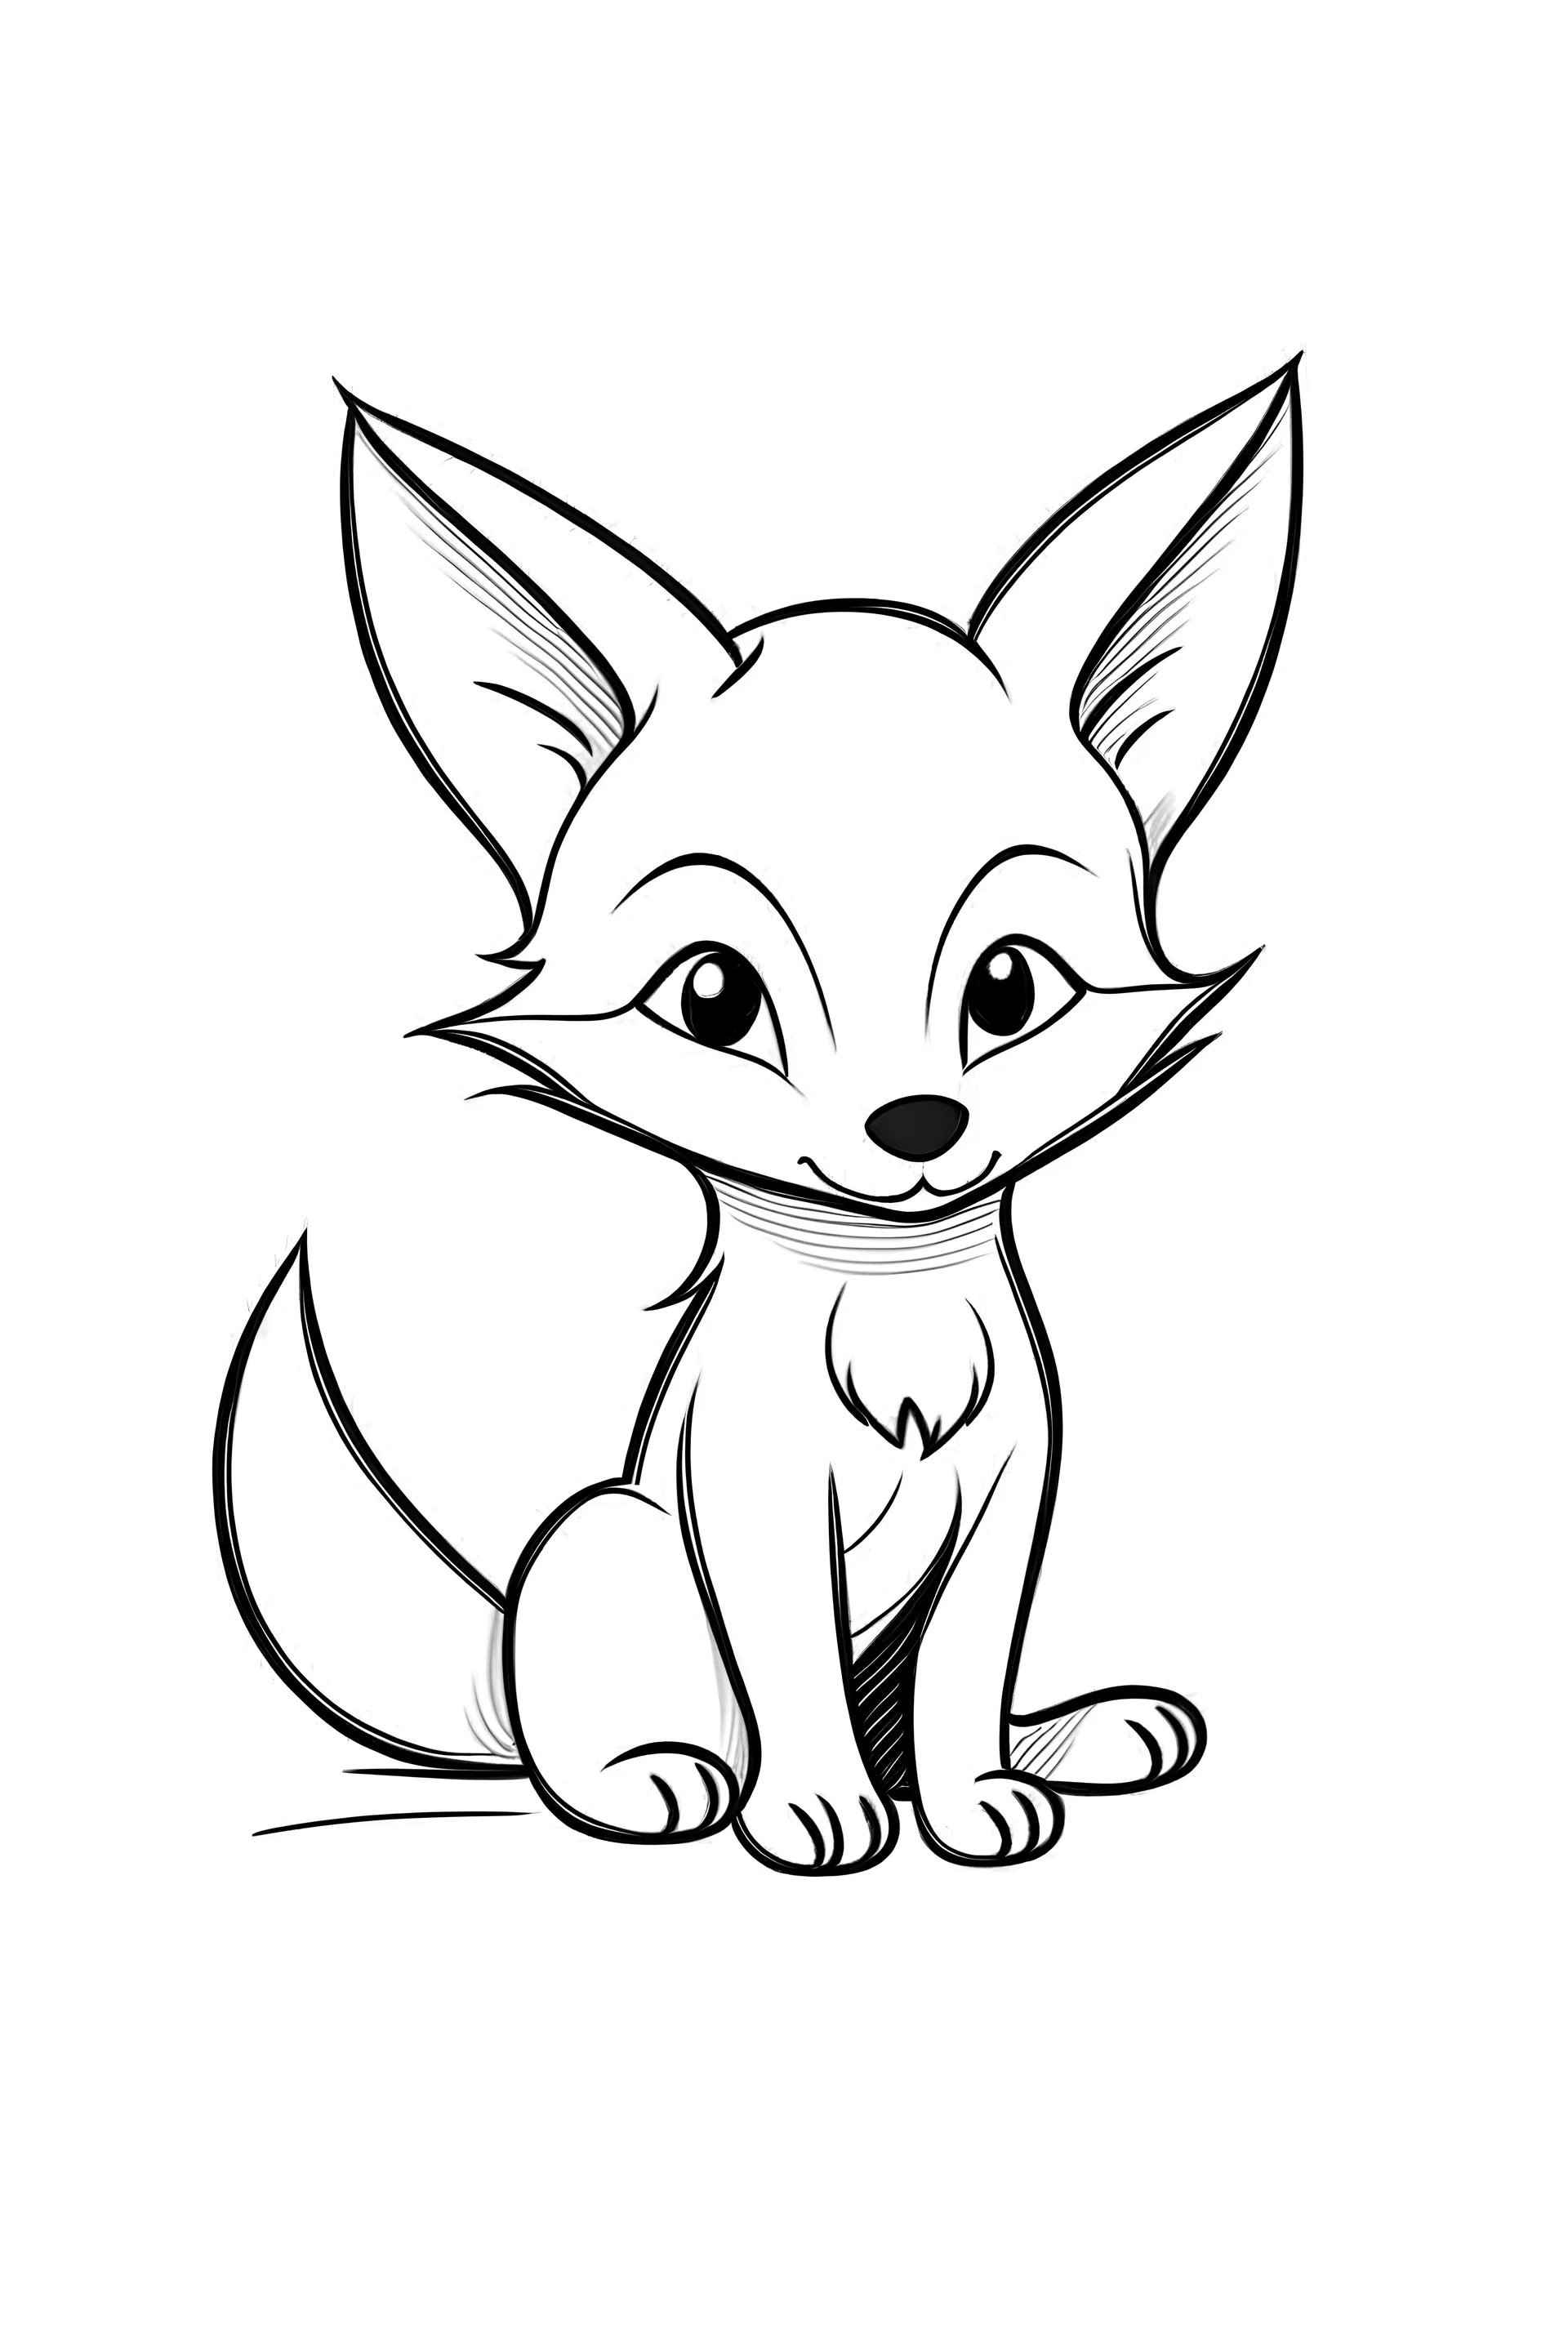 How to Draw a Fox For Kids - DrawingNow